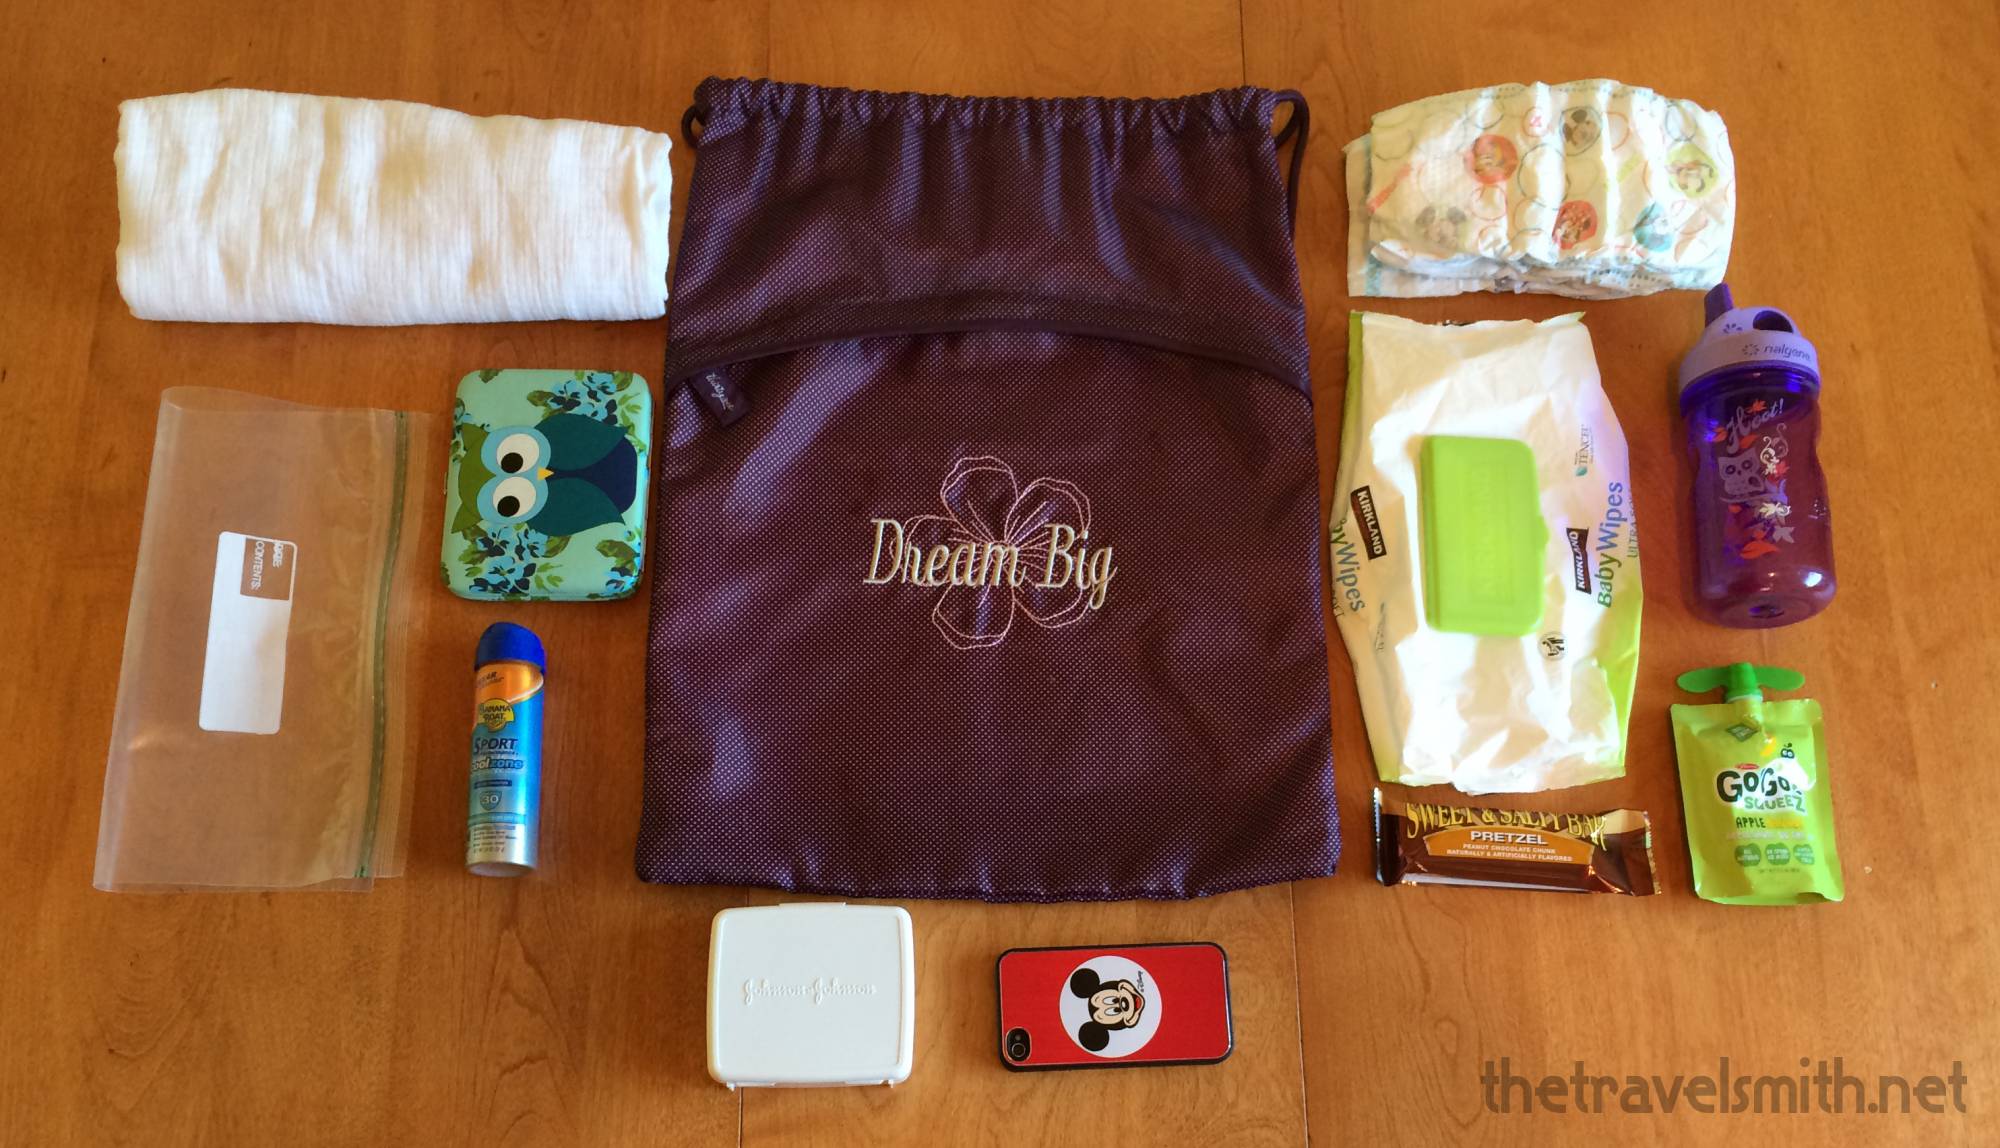 Plan what to pack and what NOT to pack in your park day bag |PassPorter.com